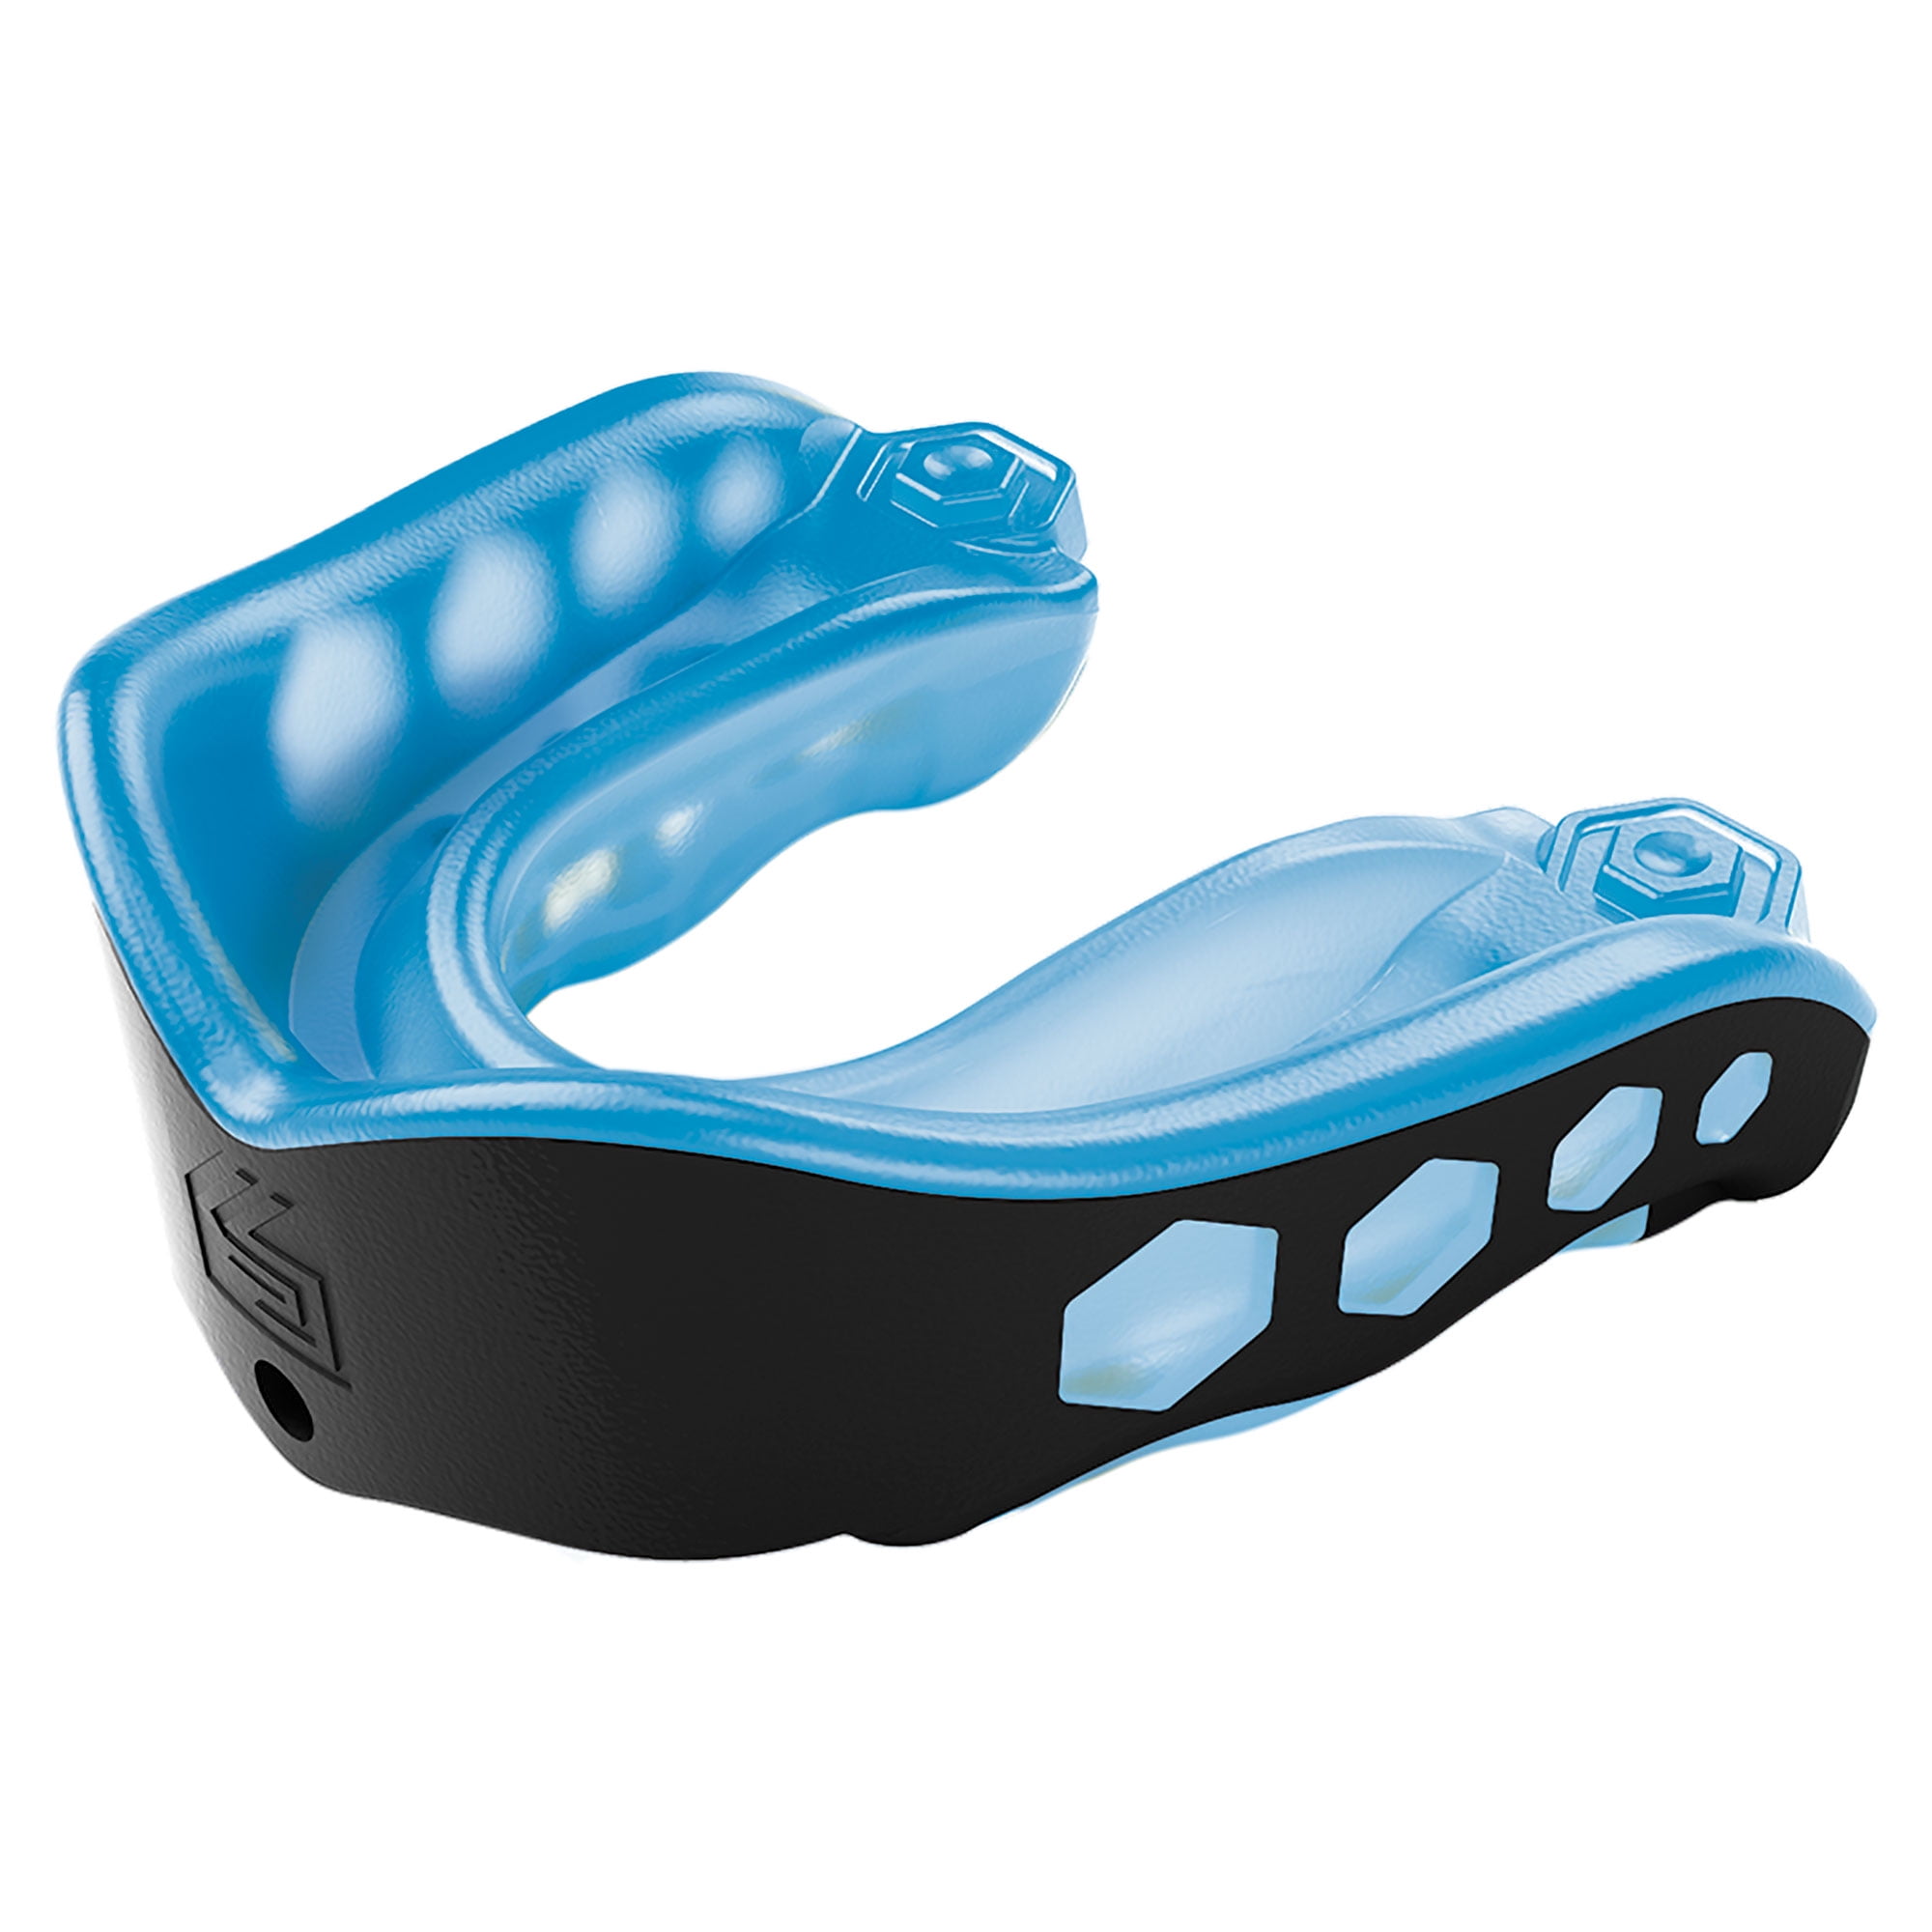 2 Ages 11 and older Shock Doctor Sport Gel Max Mouth Guard 